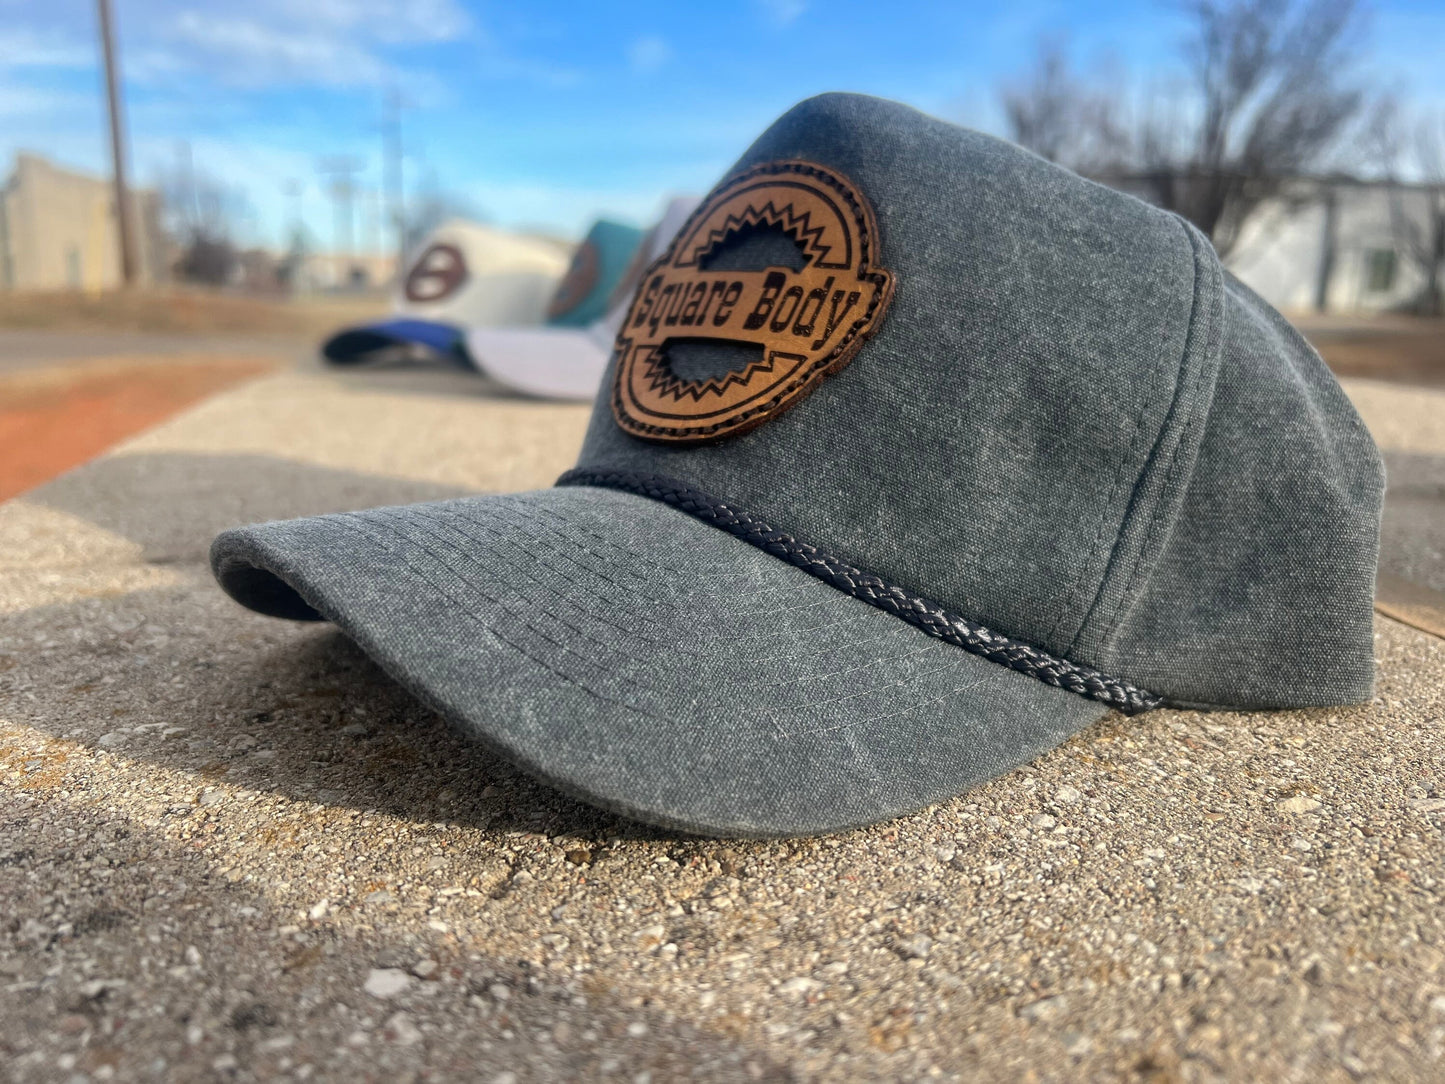 Leather Patch Chevy Squarebody Silverado Hat - Cobra Snap Back Trucker Rope Cap, Classic Truck Enthusiast Gift, Vintage Style